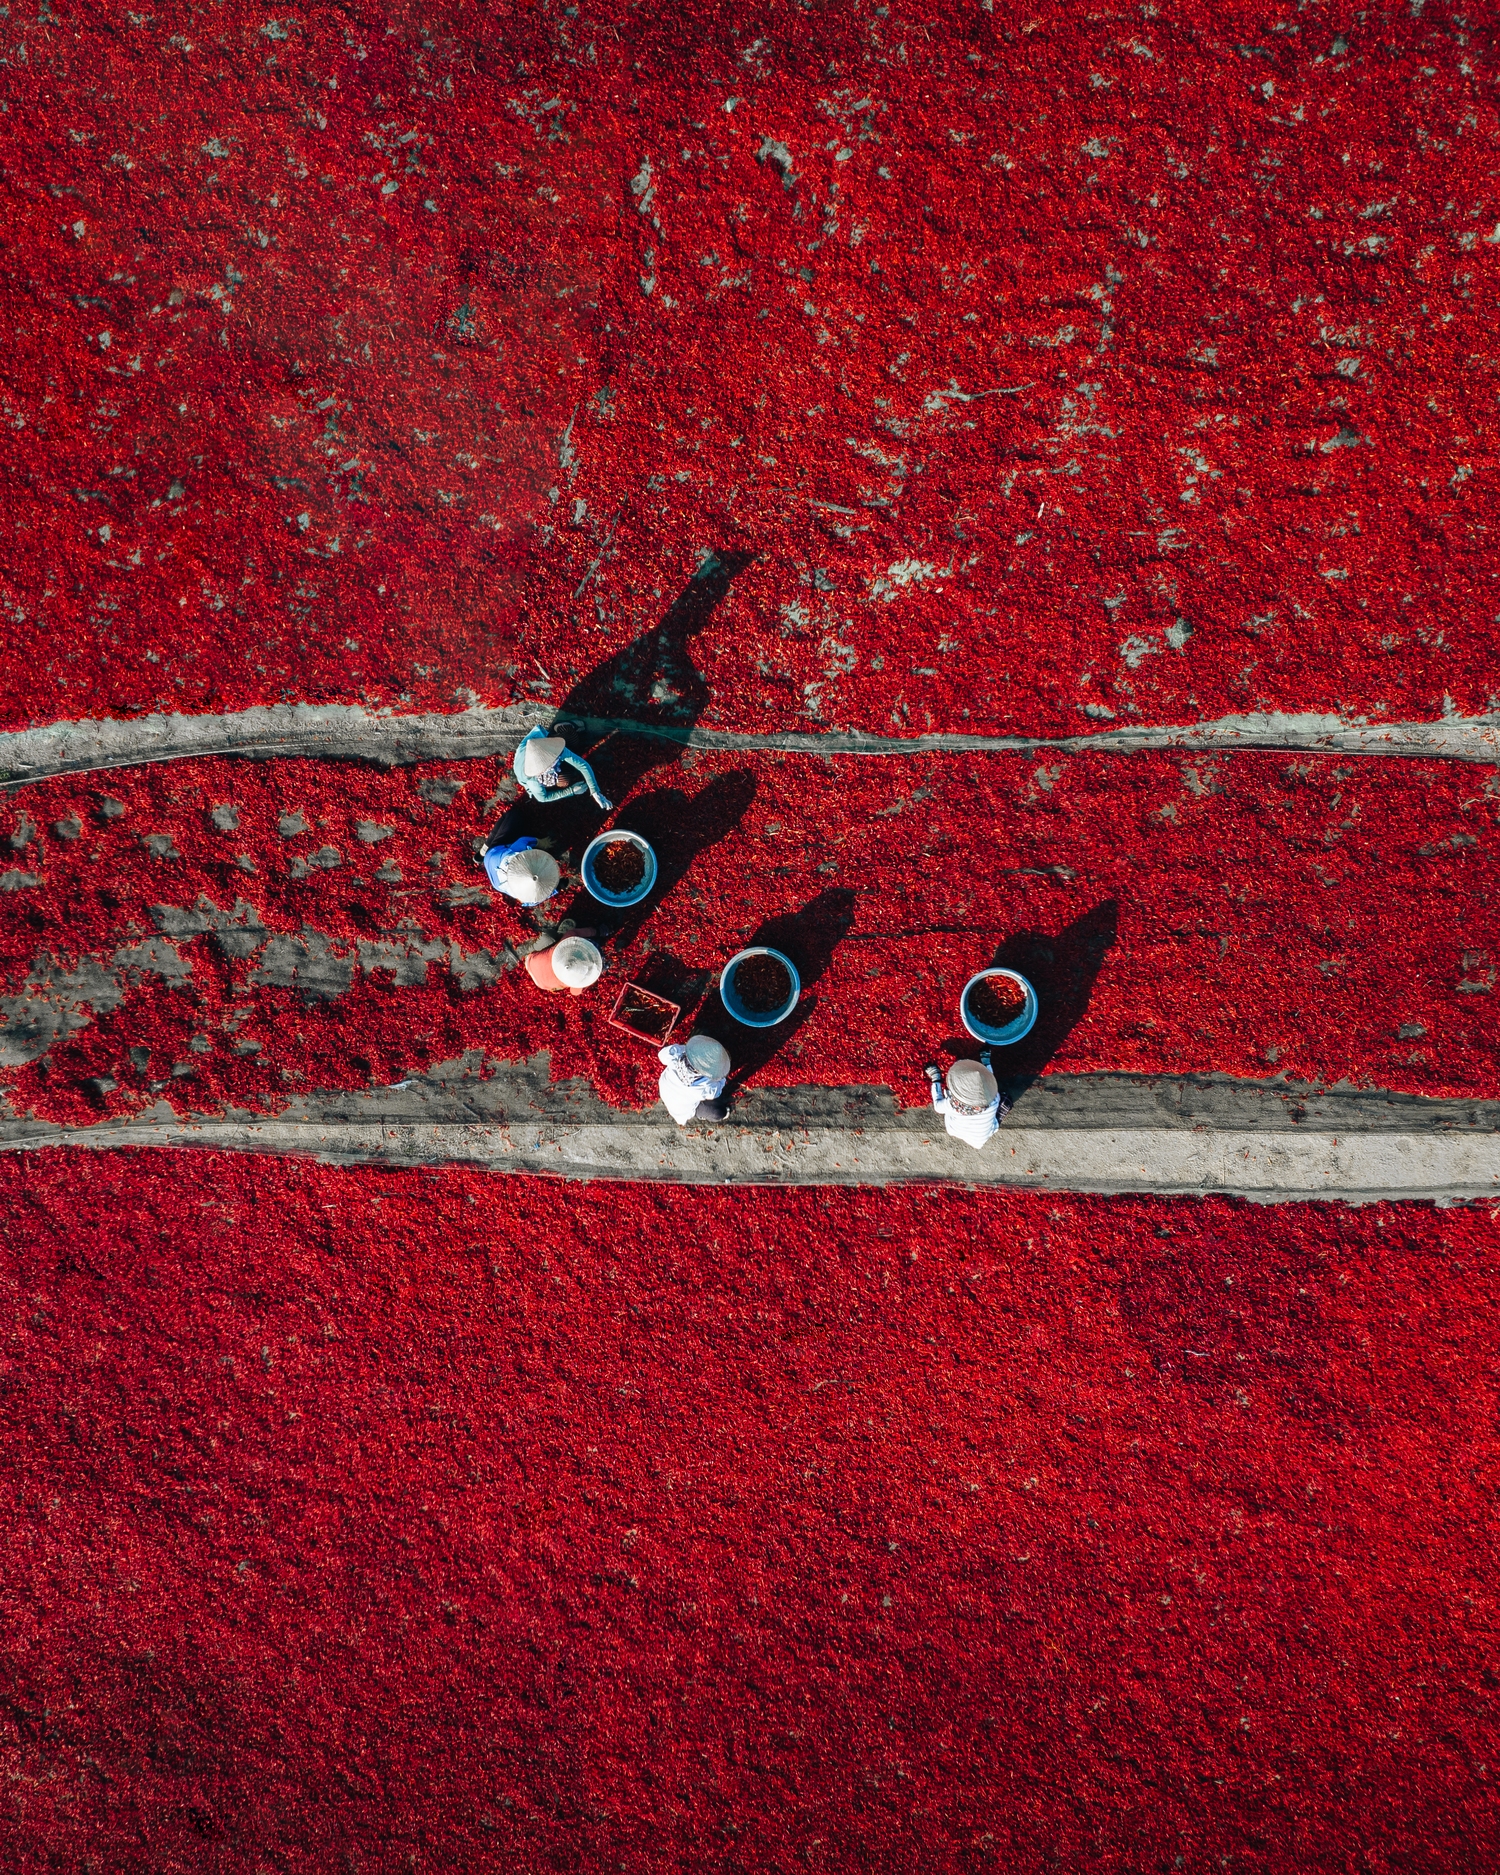 A bird's-eye view taken by Benjamin Tortorelli of farmers drying chilies in Quy Nhon City, central Vietnam.